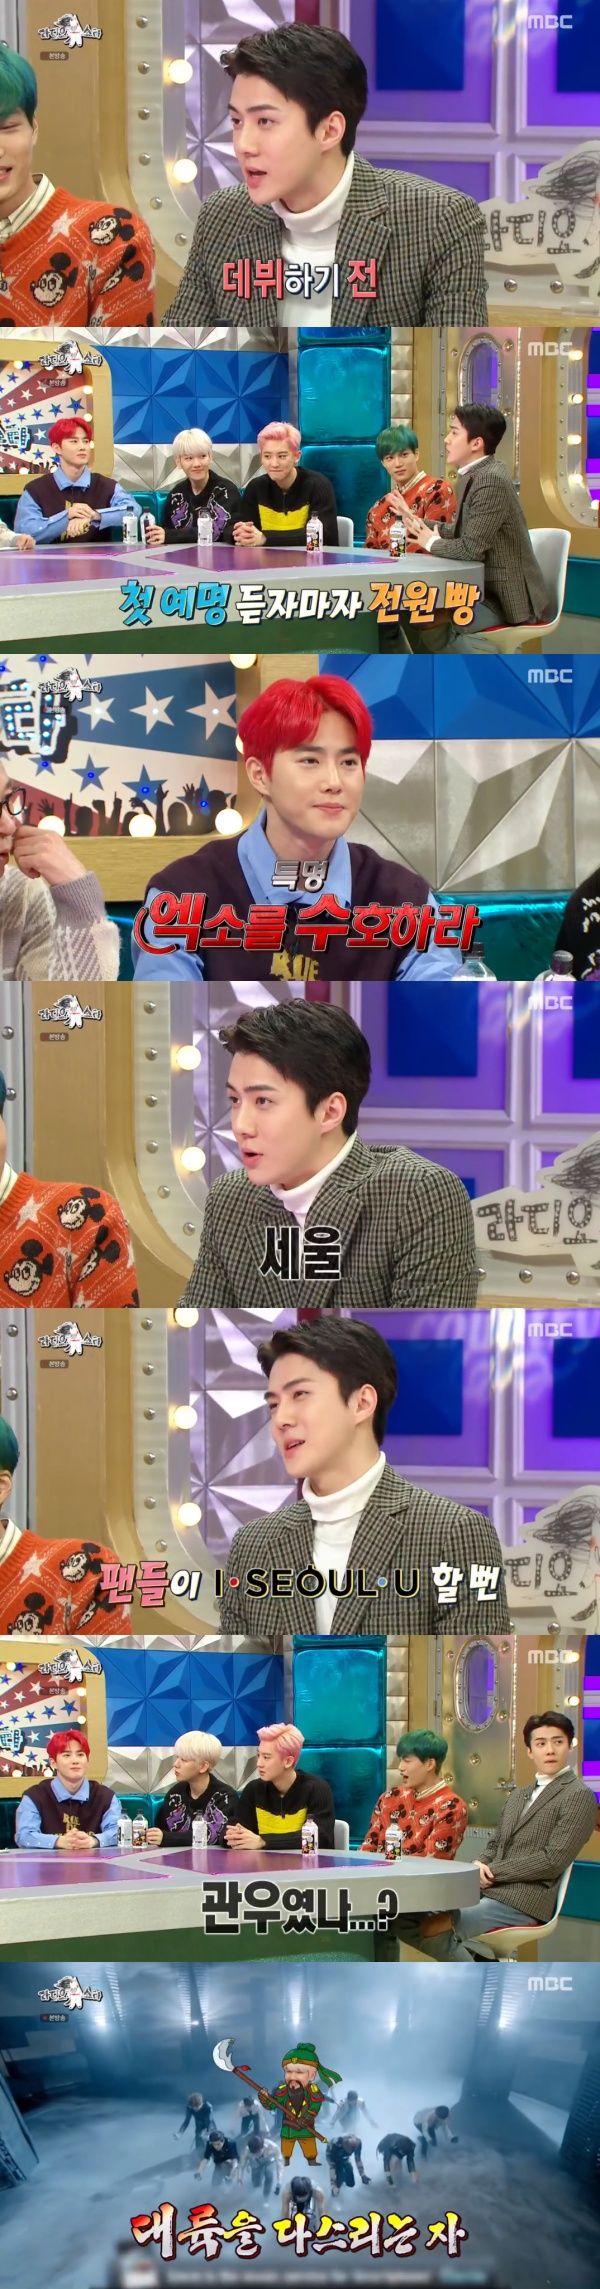 Radio Star Sehun and Baekhyun have revealed a shocking stage name candidate.MBC entertainment program Radio Star, which was broadcast on the 4th, featured EXO special, and the recently comeback group EXO (Suho, Baekhyun, Chanyeol, Kai, Sehun, Chen) appeared as guests.Chen also played as a special MC.Sehun said he wanted to avoid Lee Soos choice, which was something that Lee Soo wanted to avoid.Sehun said: I give you a stage name before my debut, when I told Suho, The quasi-face is now Suho.There, the members laughed, he explained, shocked to hear Suhos name.I thought Kai, Dio, and Chen were coming out, and at that time I thought it was childish, and it was funny, he said. Now I set my name, but at first I said it was a setup.Menbong came, he said, laughing.Fortunately, however, SM Entertainment employees dissuaded them because they had the same spelling as Seoul, and eventually they were able to use their real name, Sehun.Baekhyun, who listened to this, said, I was also a guan Yu when I first came in.